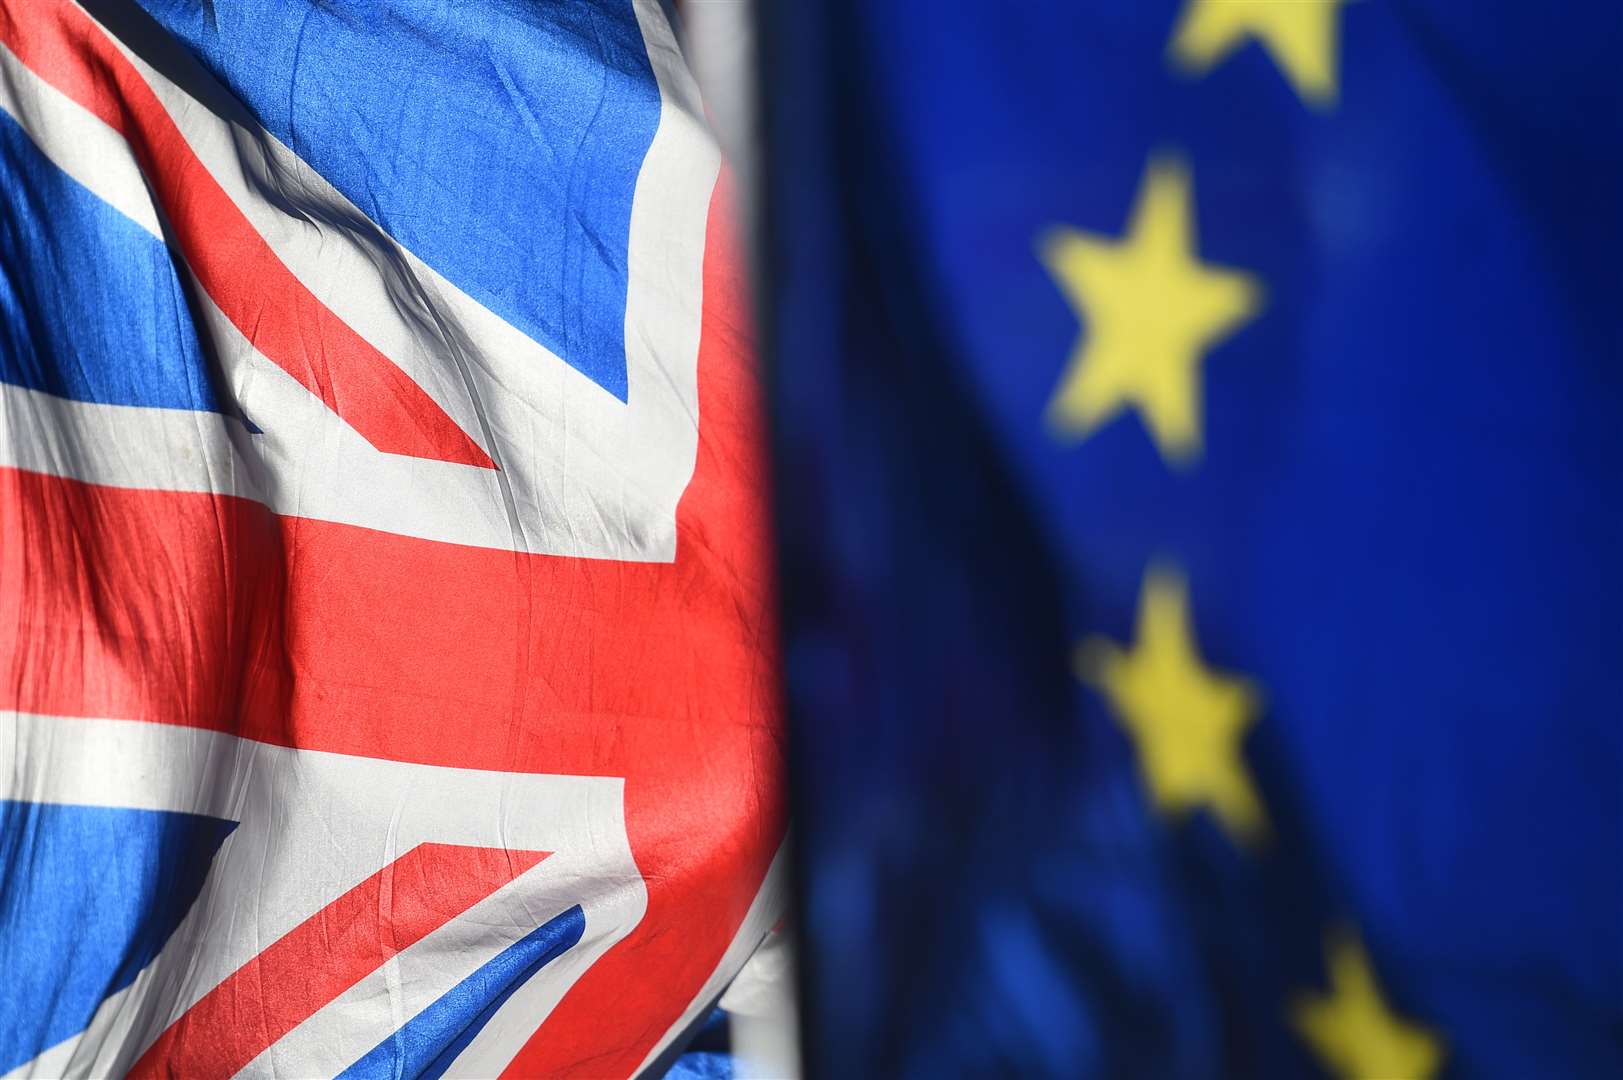 Some 22 workshops will be staged across the county to get firms Brexit ready